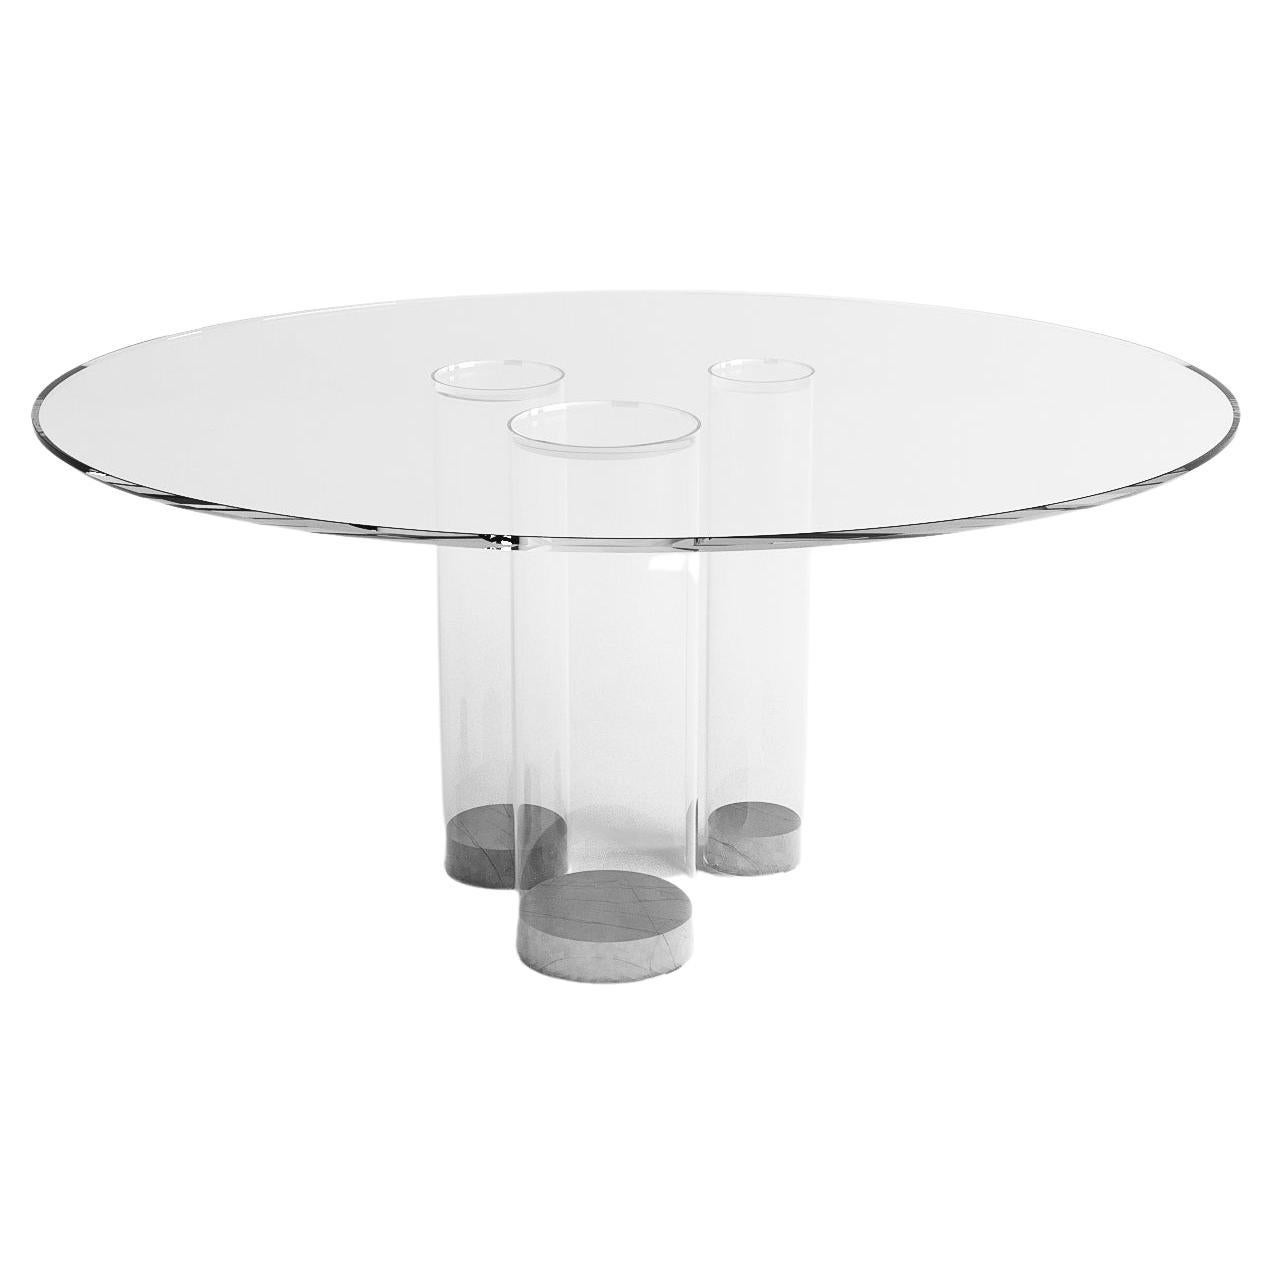 Contemporary round dining table, white glass & Calacatta marble, Belgian design For Sale